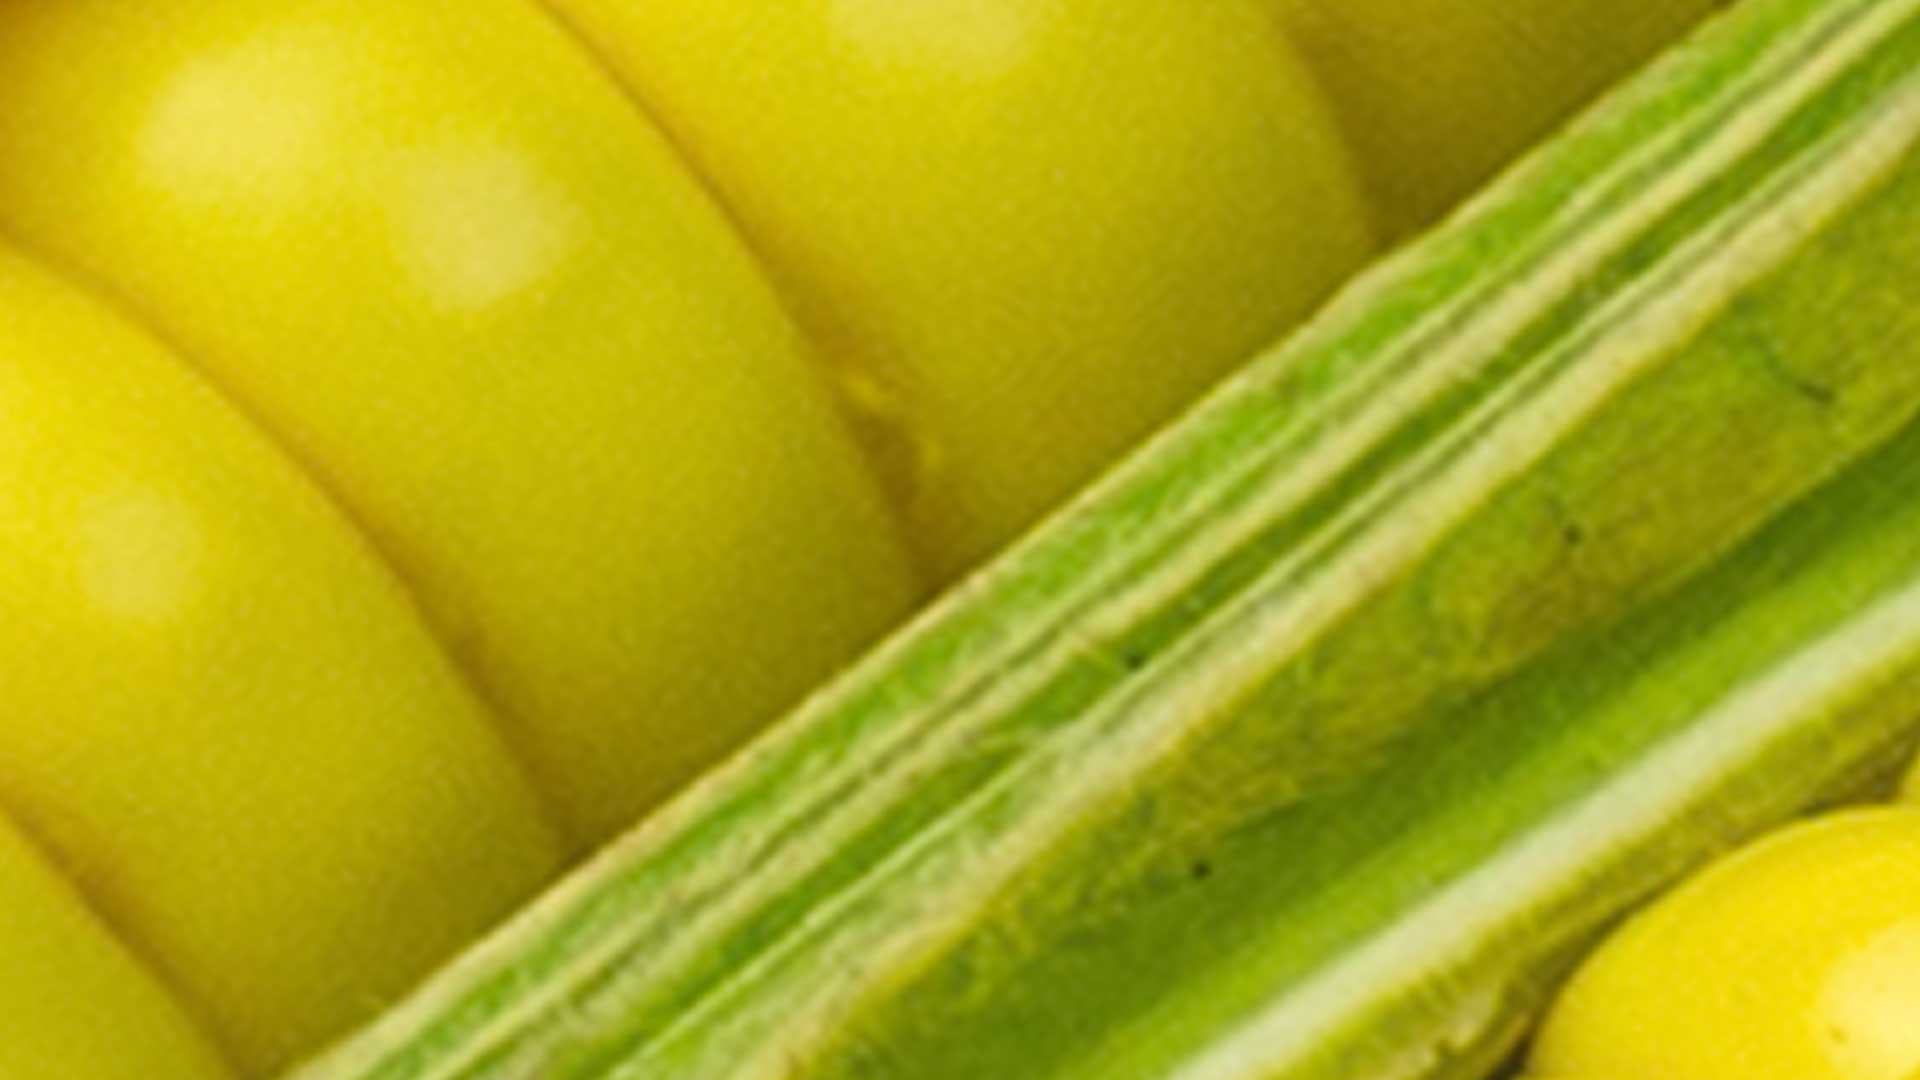 A close up of a vegetable